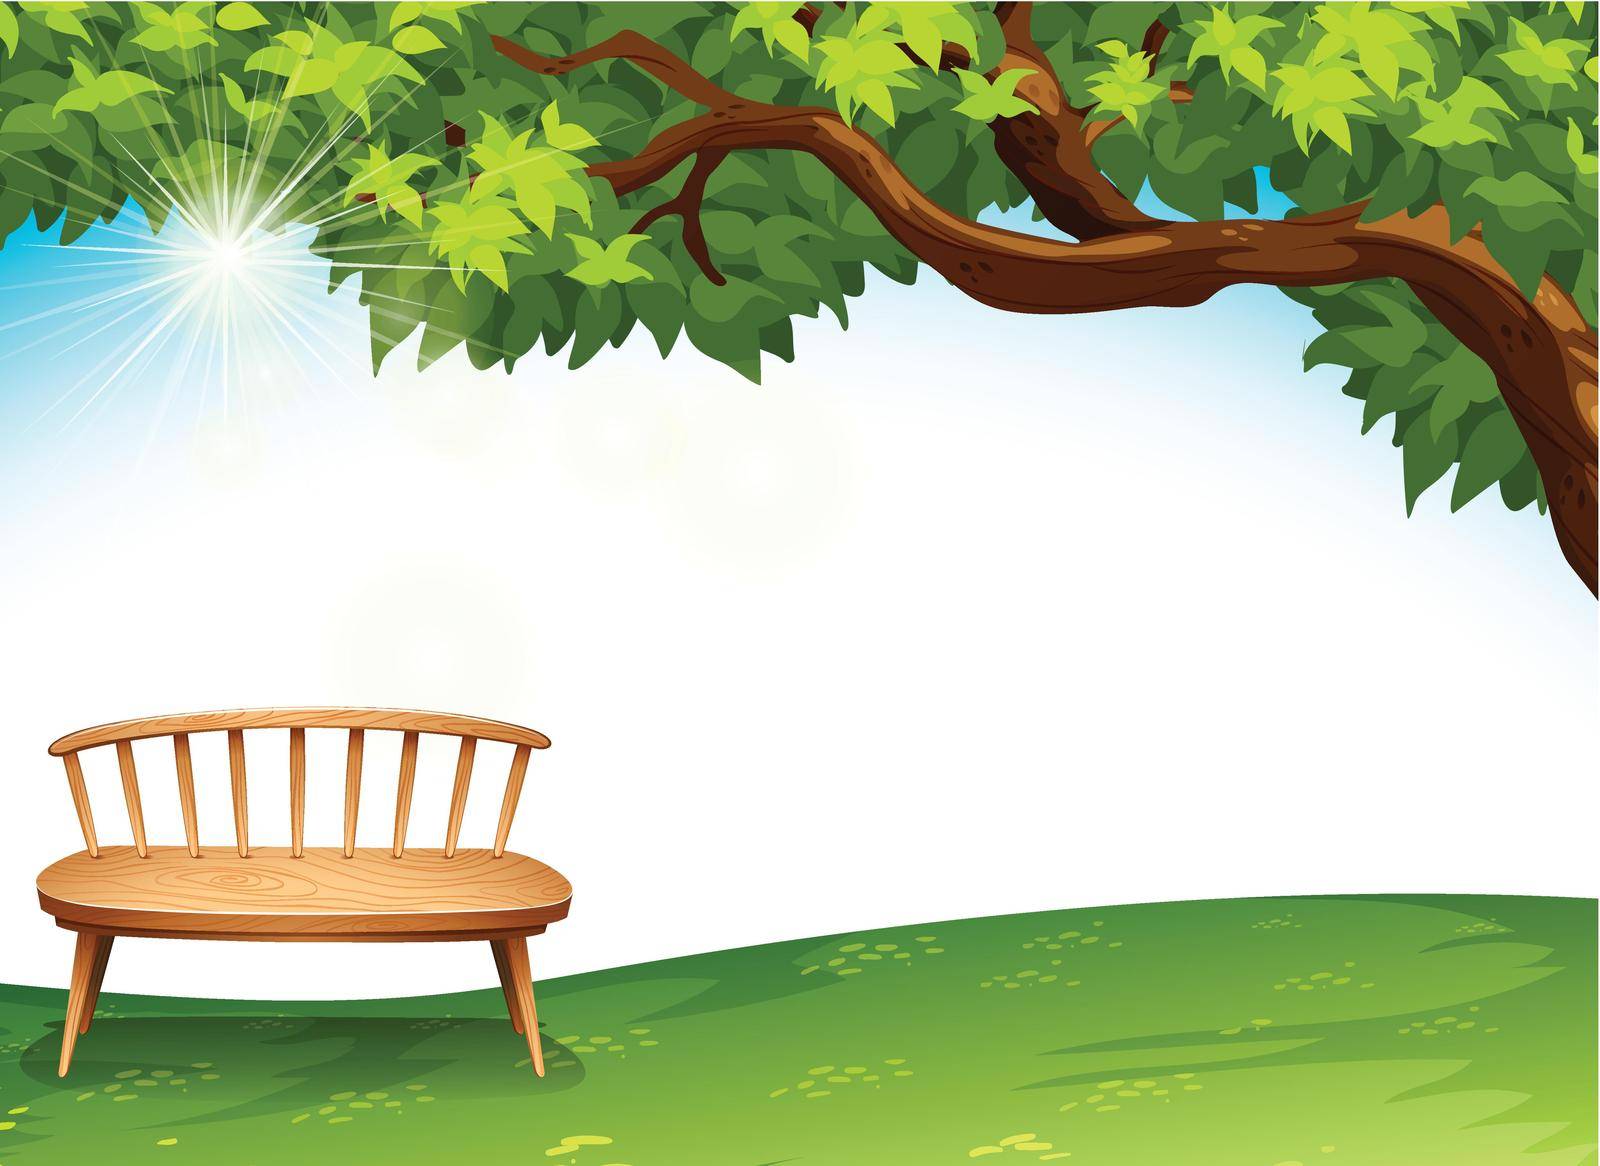 Illustration of a chair near the tree